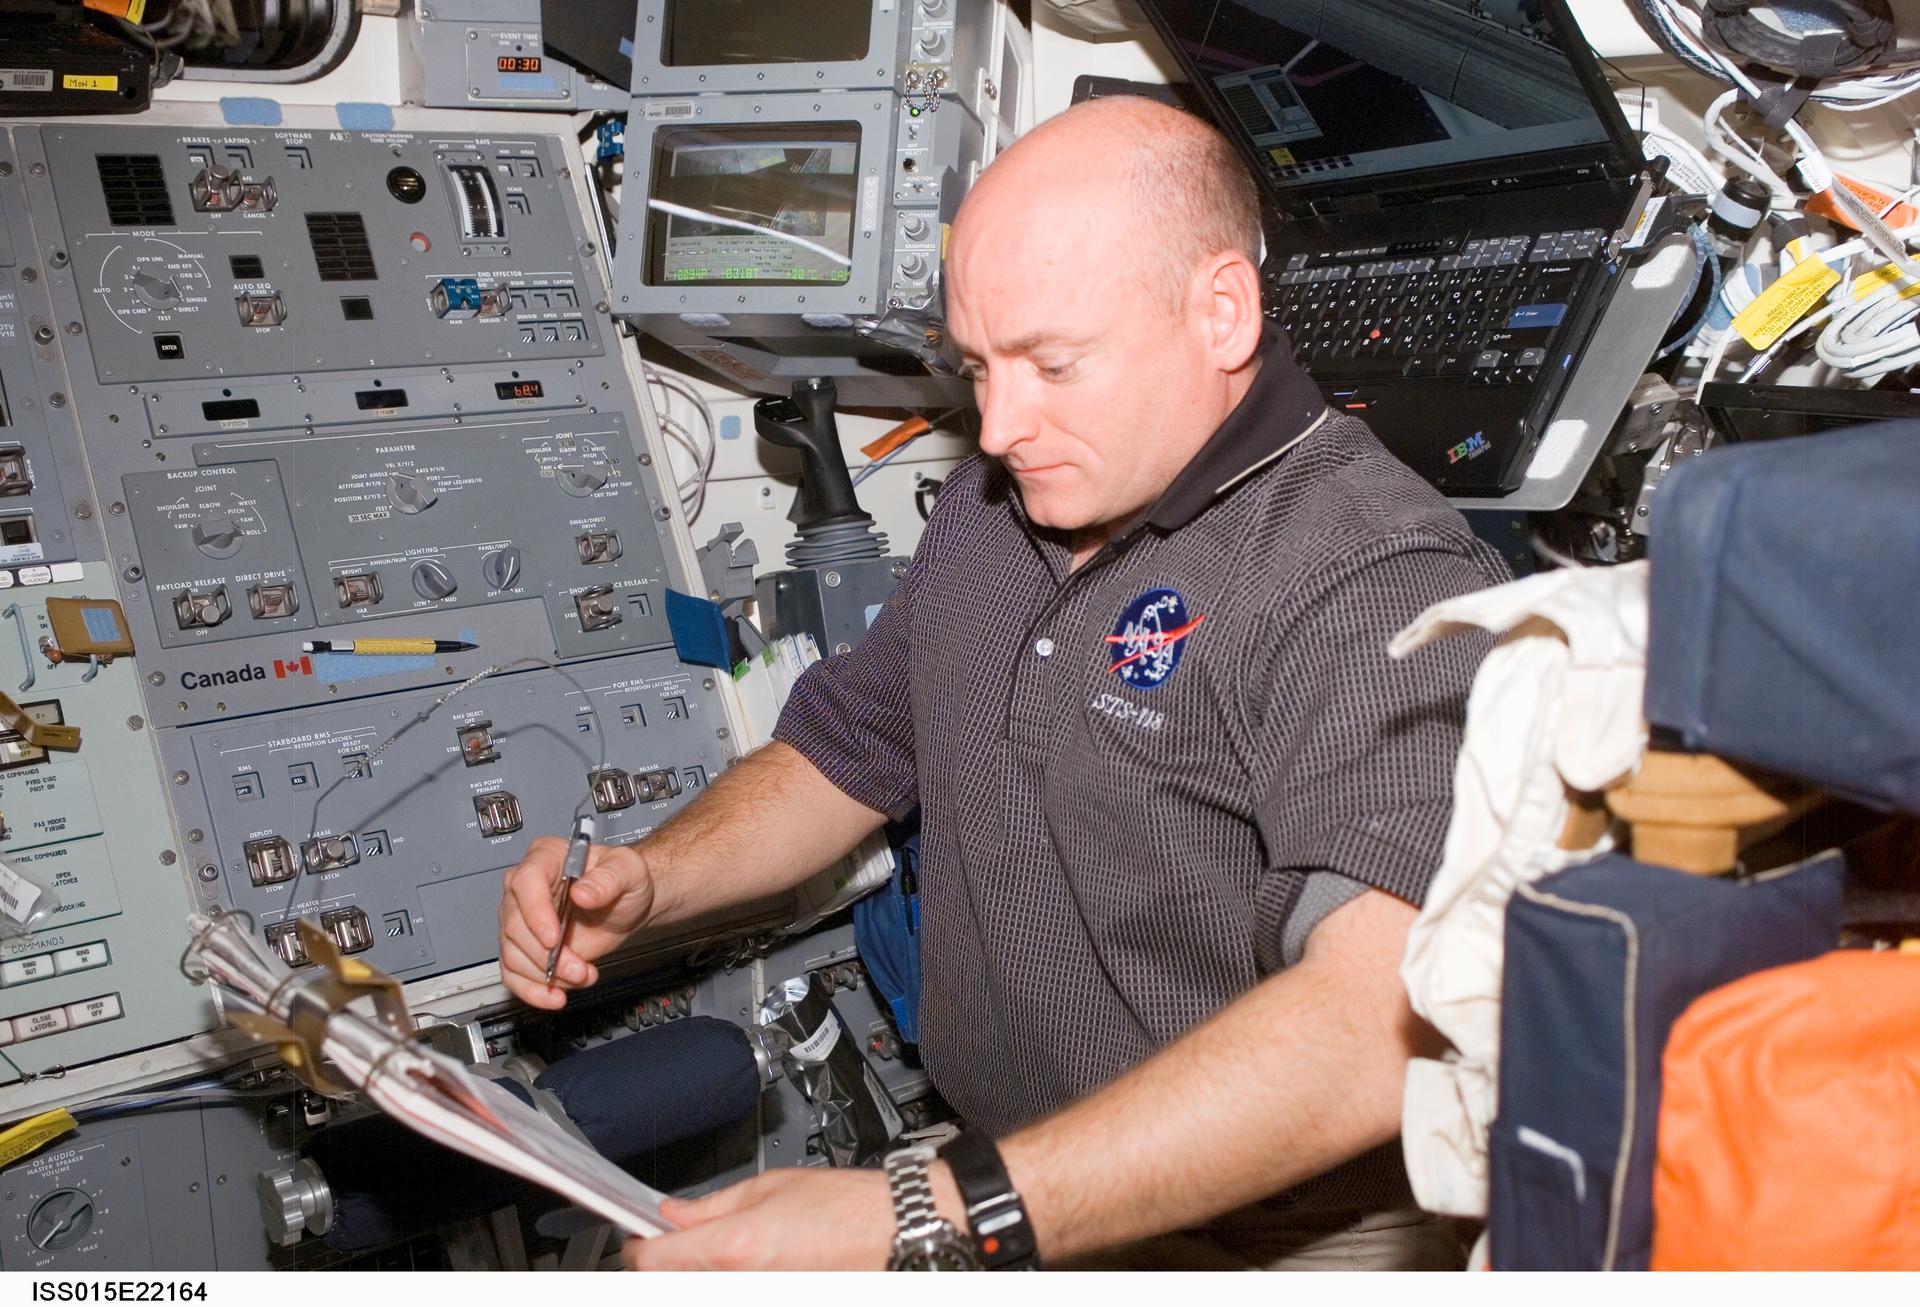 a man looks at a checklist in a cramped cockpit